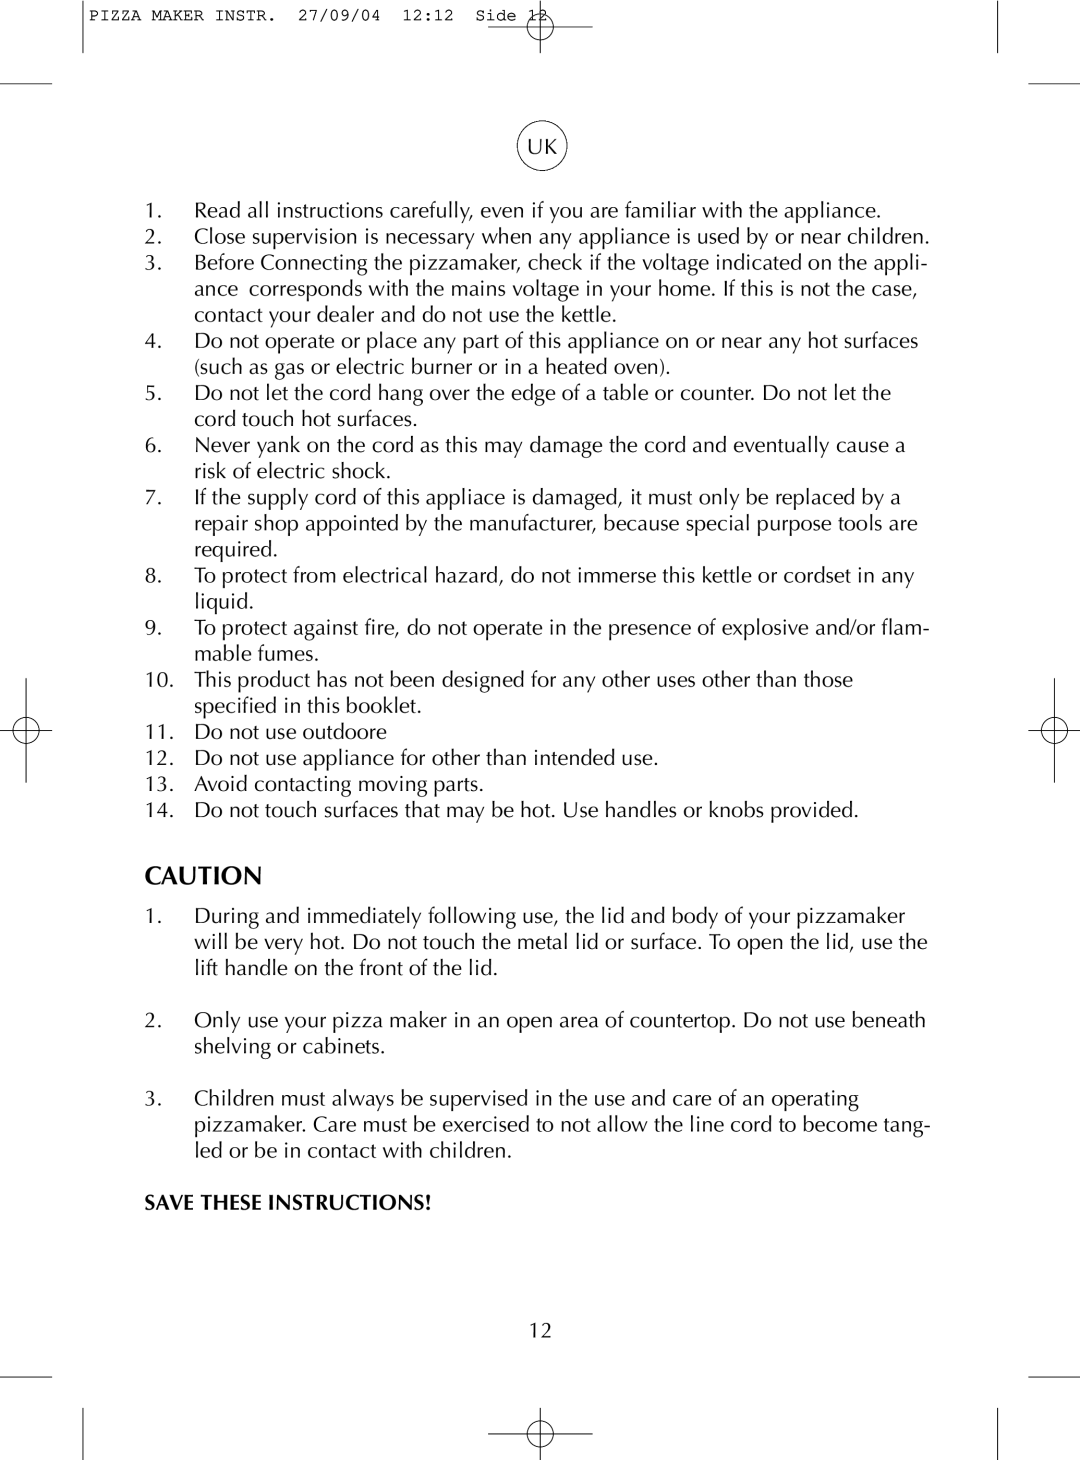 Melissa TS 040S manual Save These Instructions 